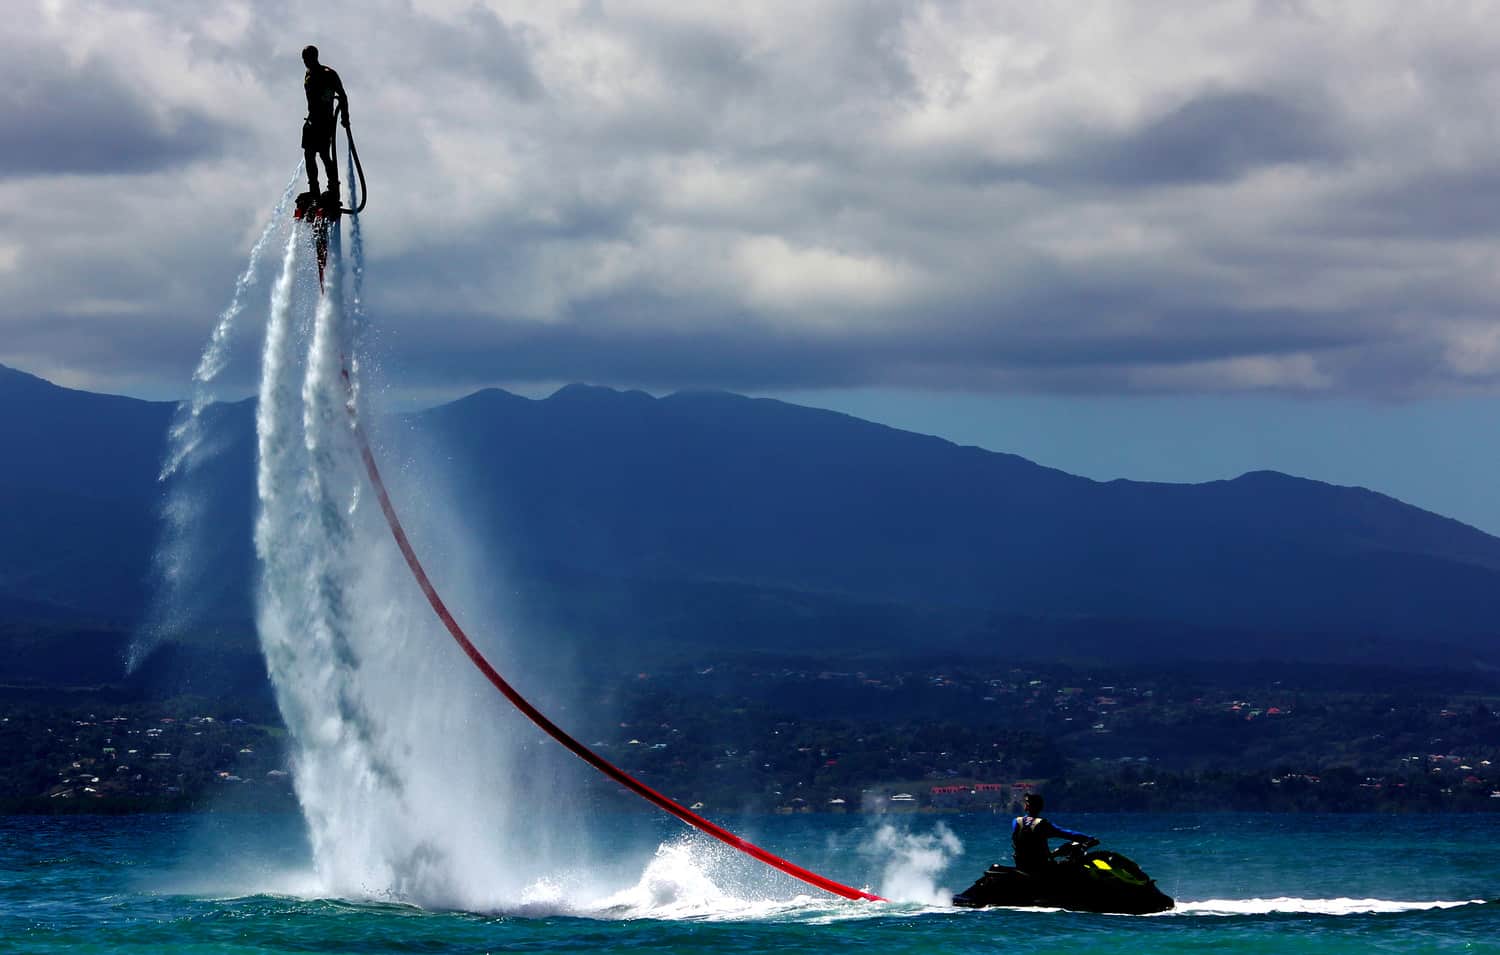 Water Jet Packs vs. Flyboards – which one's for you?